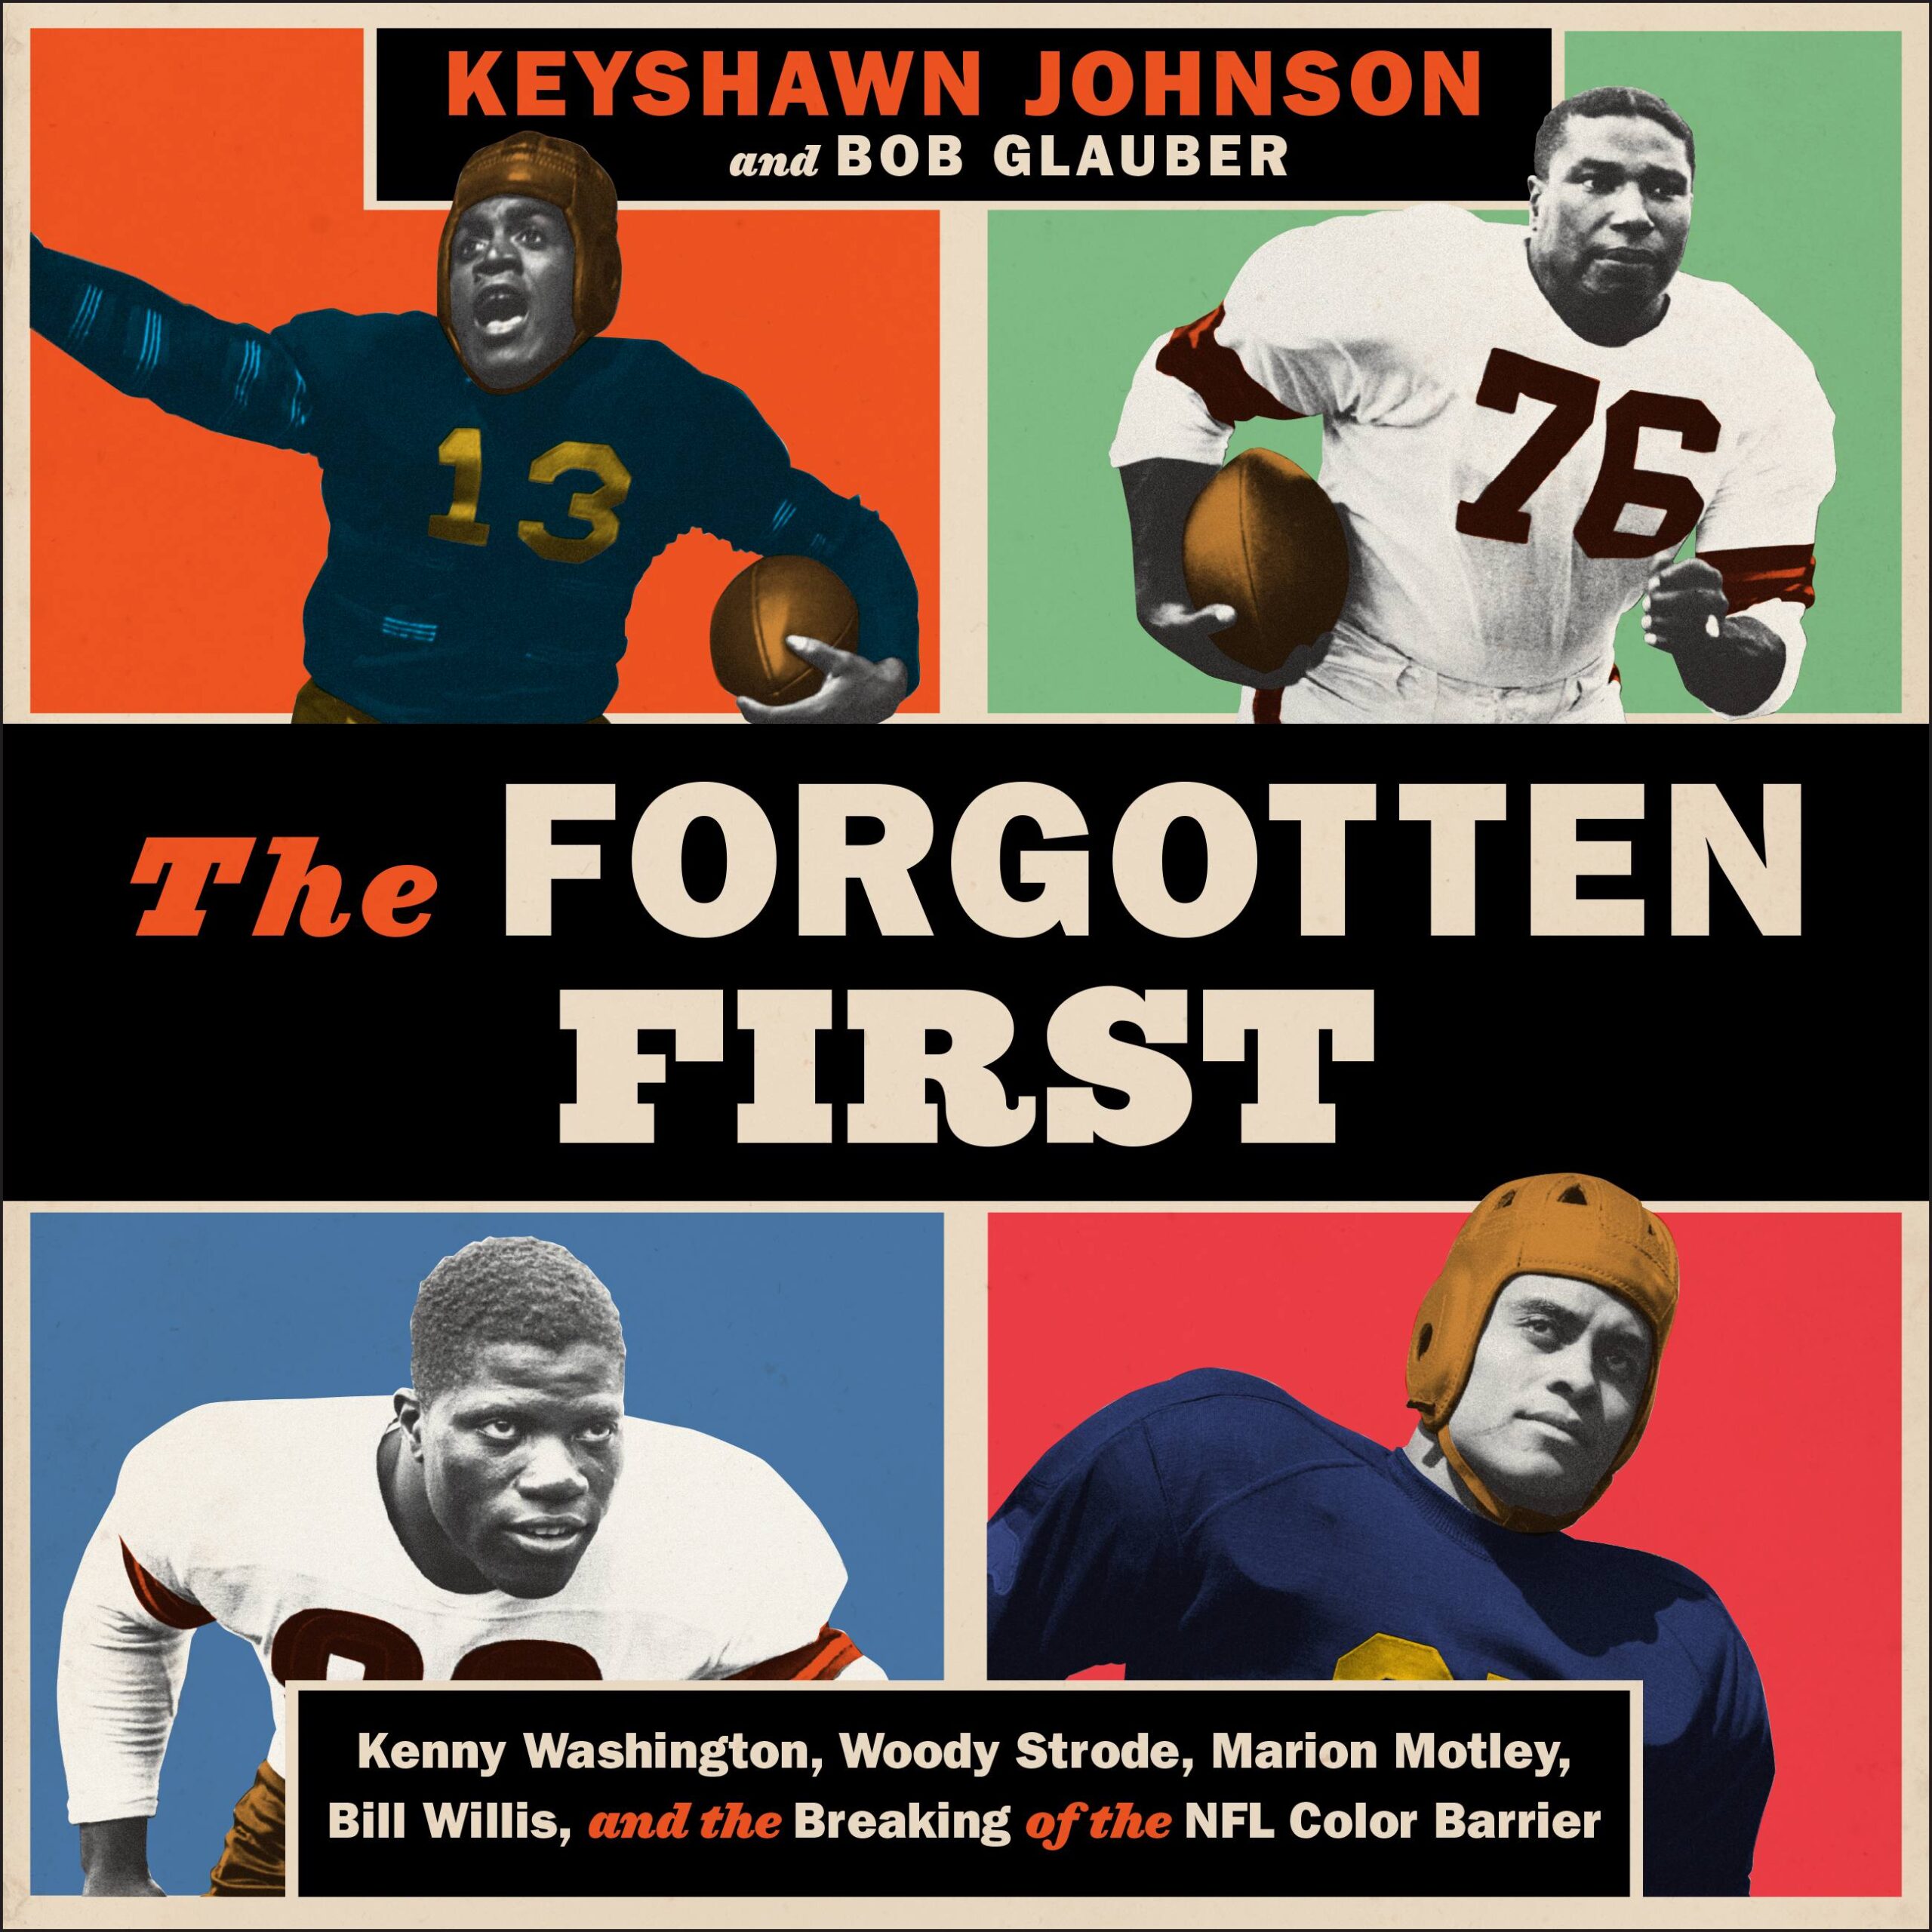 Cover of book "Forgotten First"